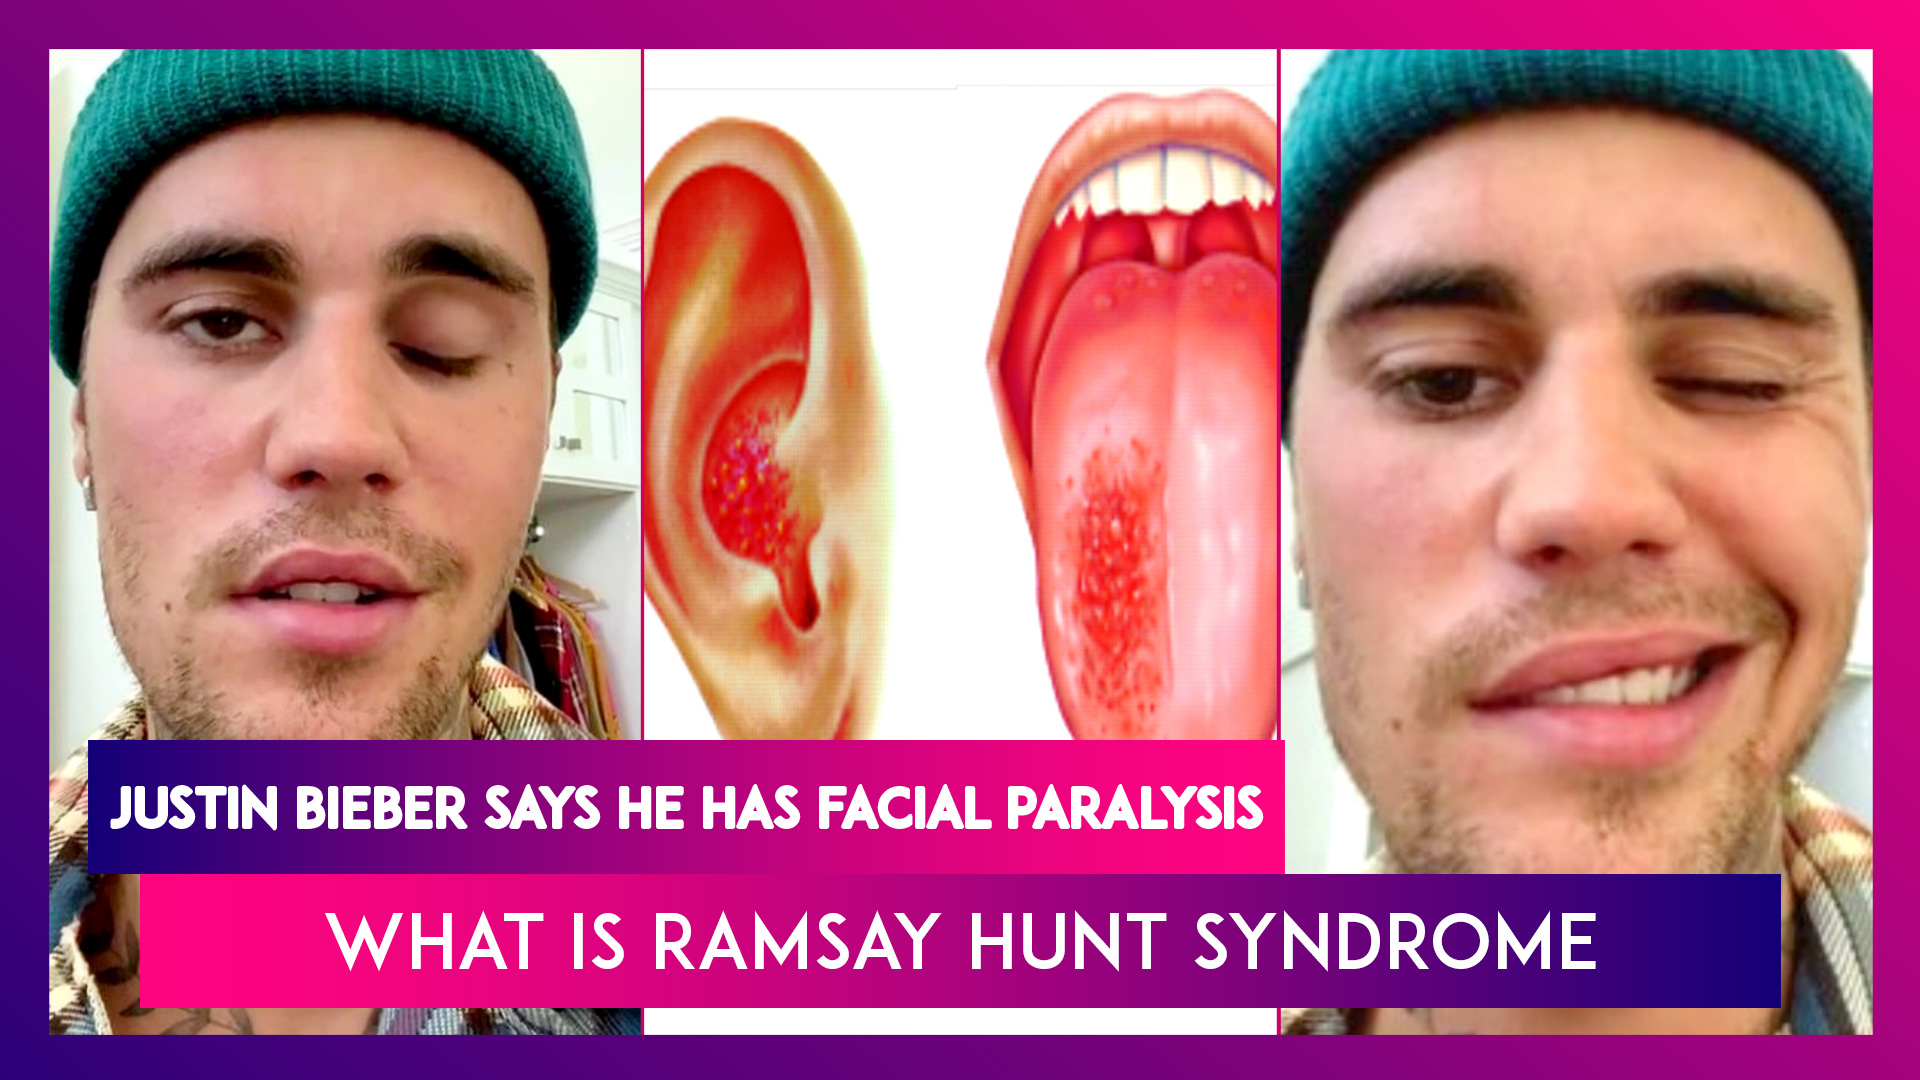 Justin Bieber Reveals He Has Facial Paralysis Caused by Ramsay Hunt Syndrome